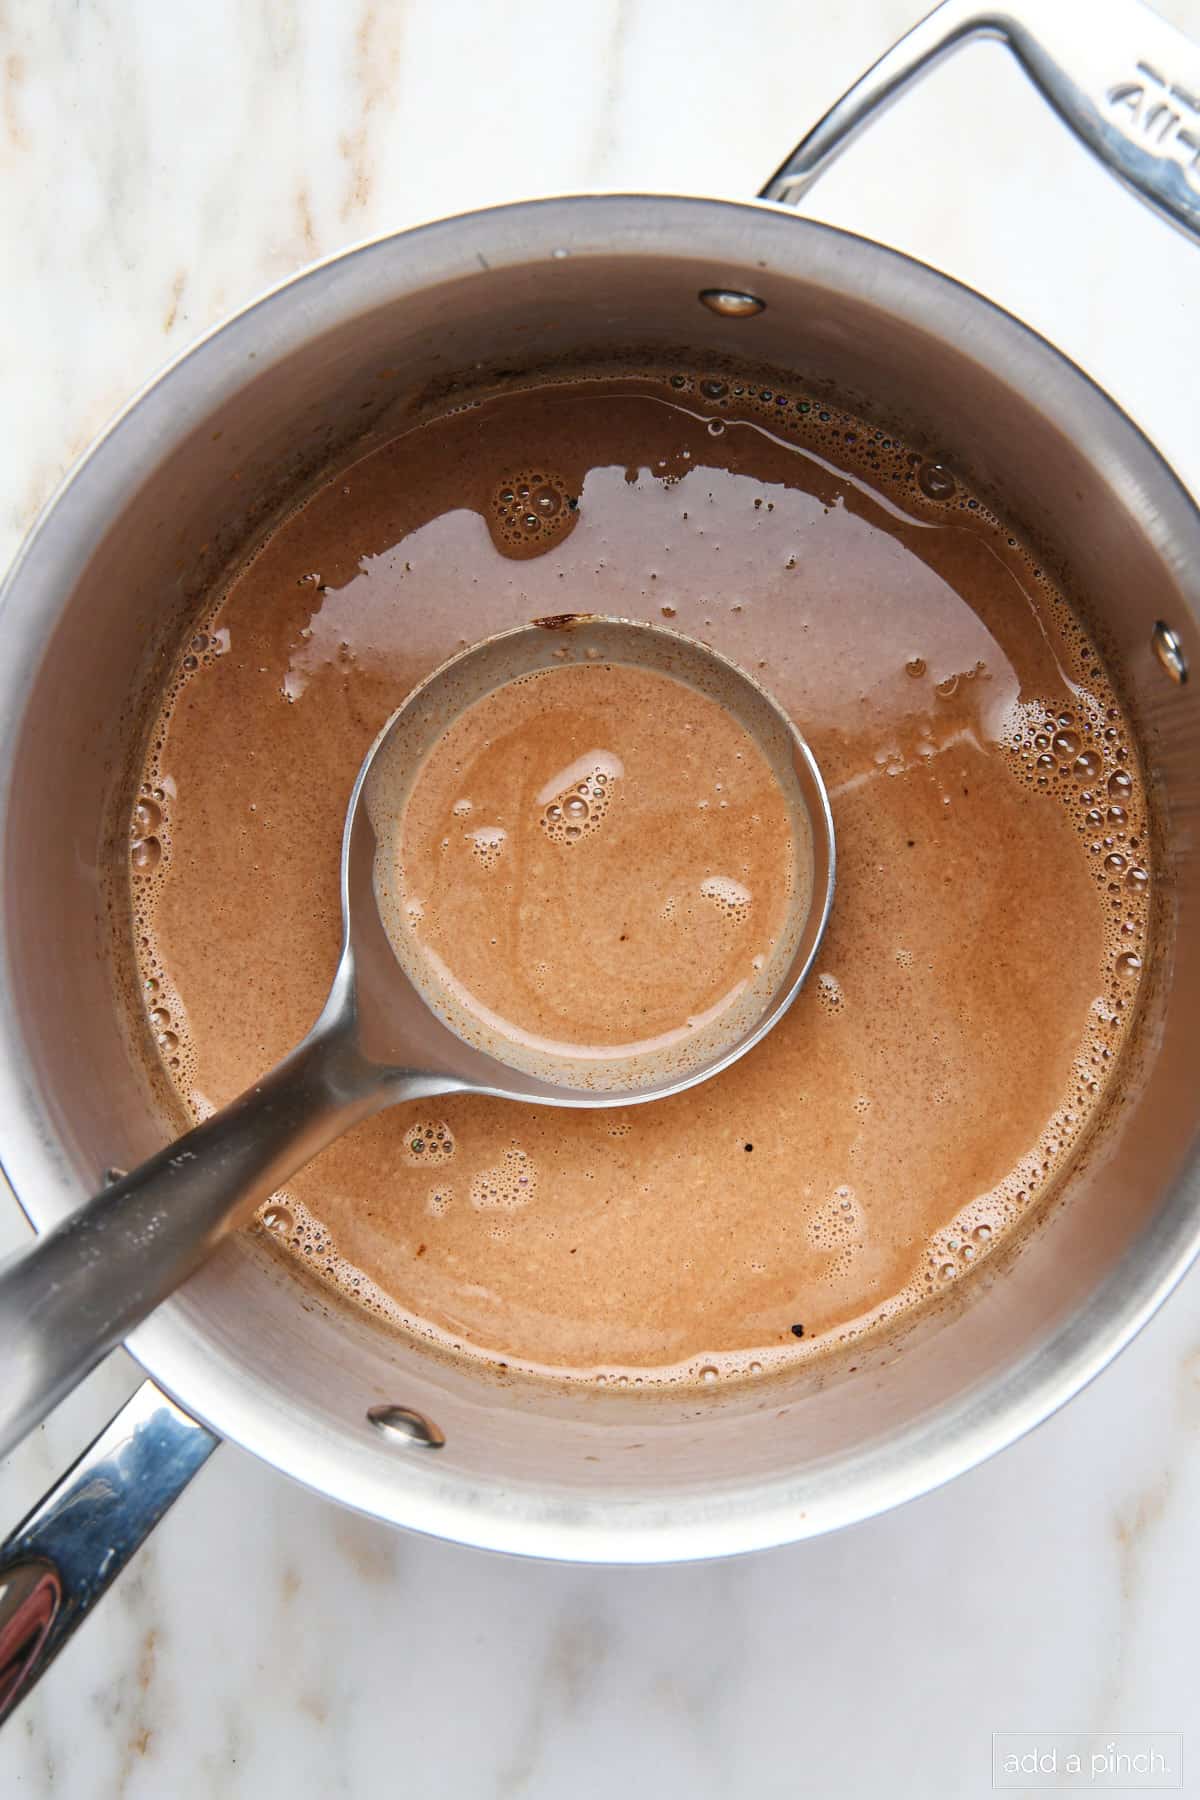 Hot chocolate in a heavy sauce pan with a ladle filled for serving.